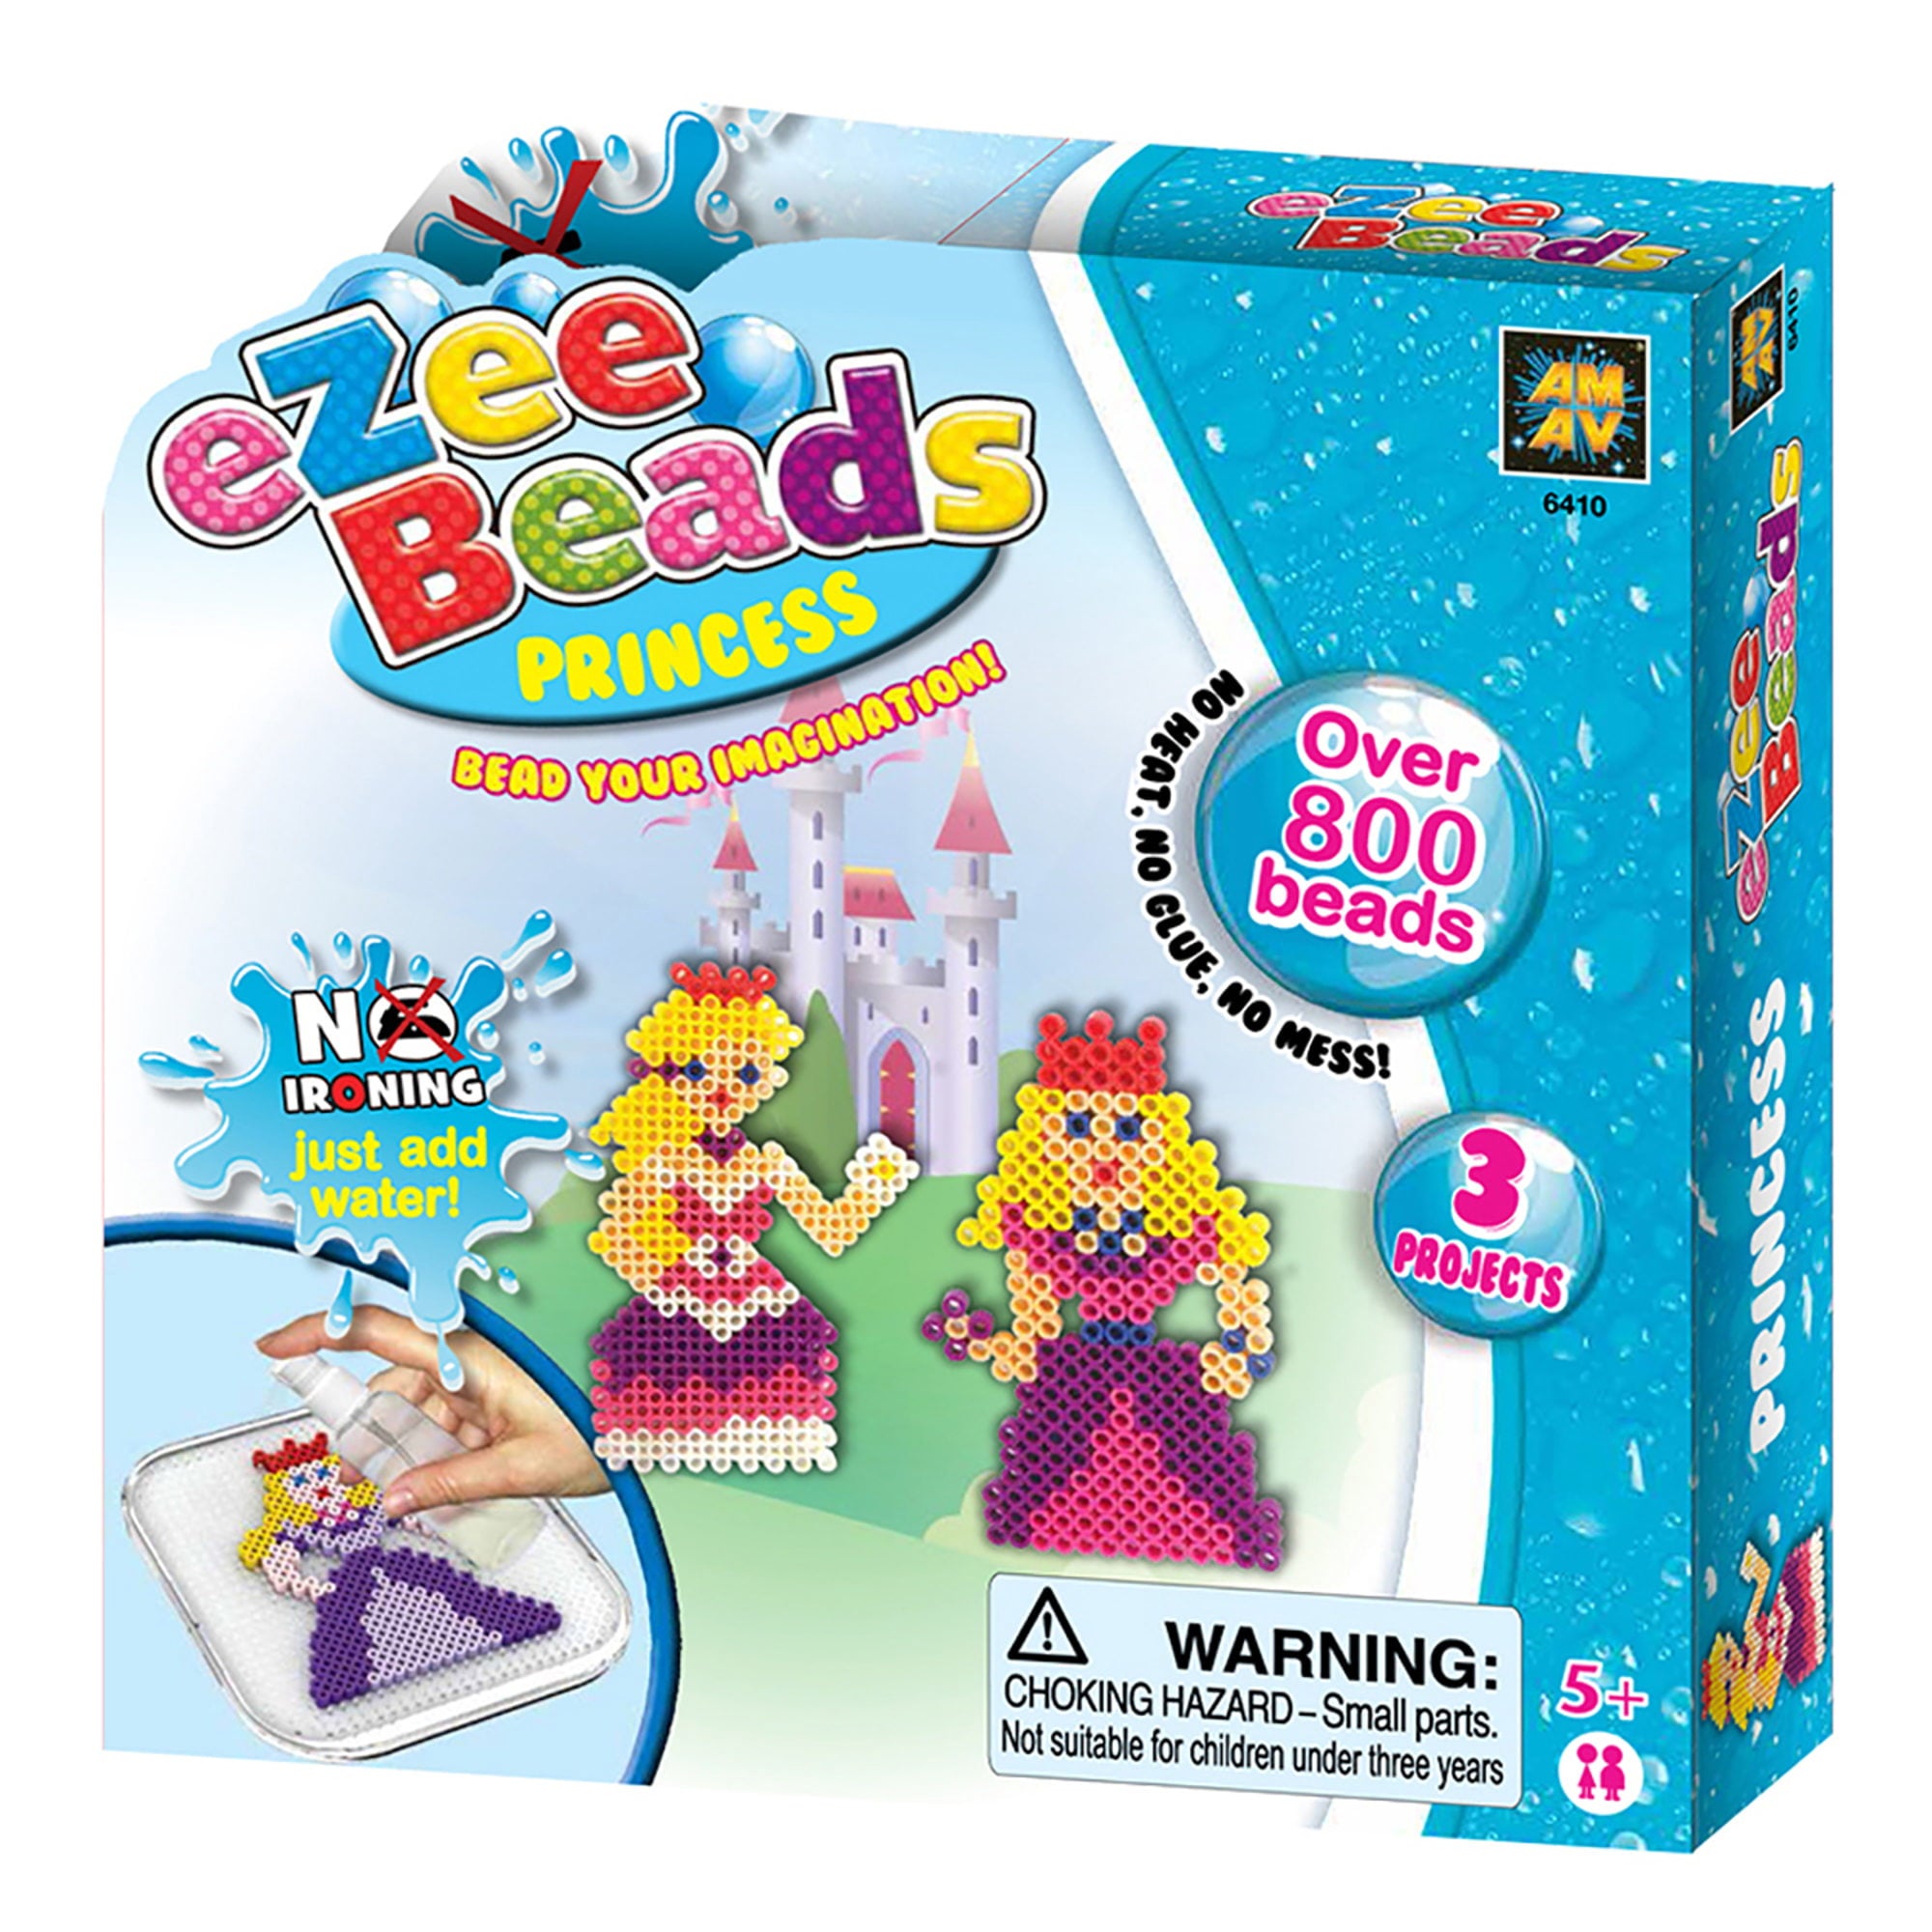 AMAV EZ Beads Princess-800 Beads Set, Craft Kit to Create Fun and Easy Bead Projects, Children Ages 5 and Up